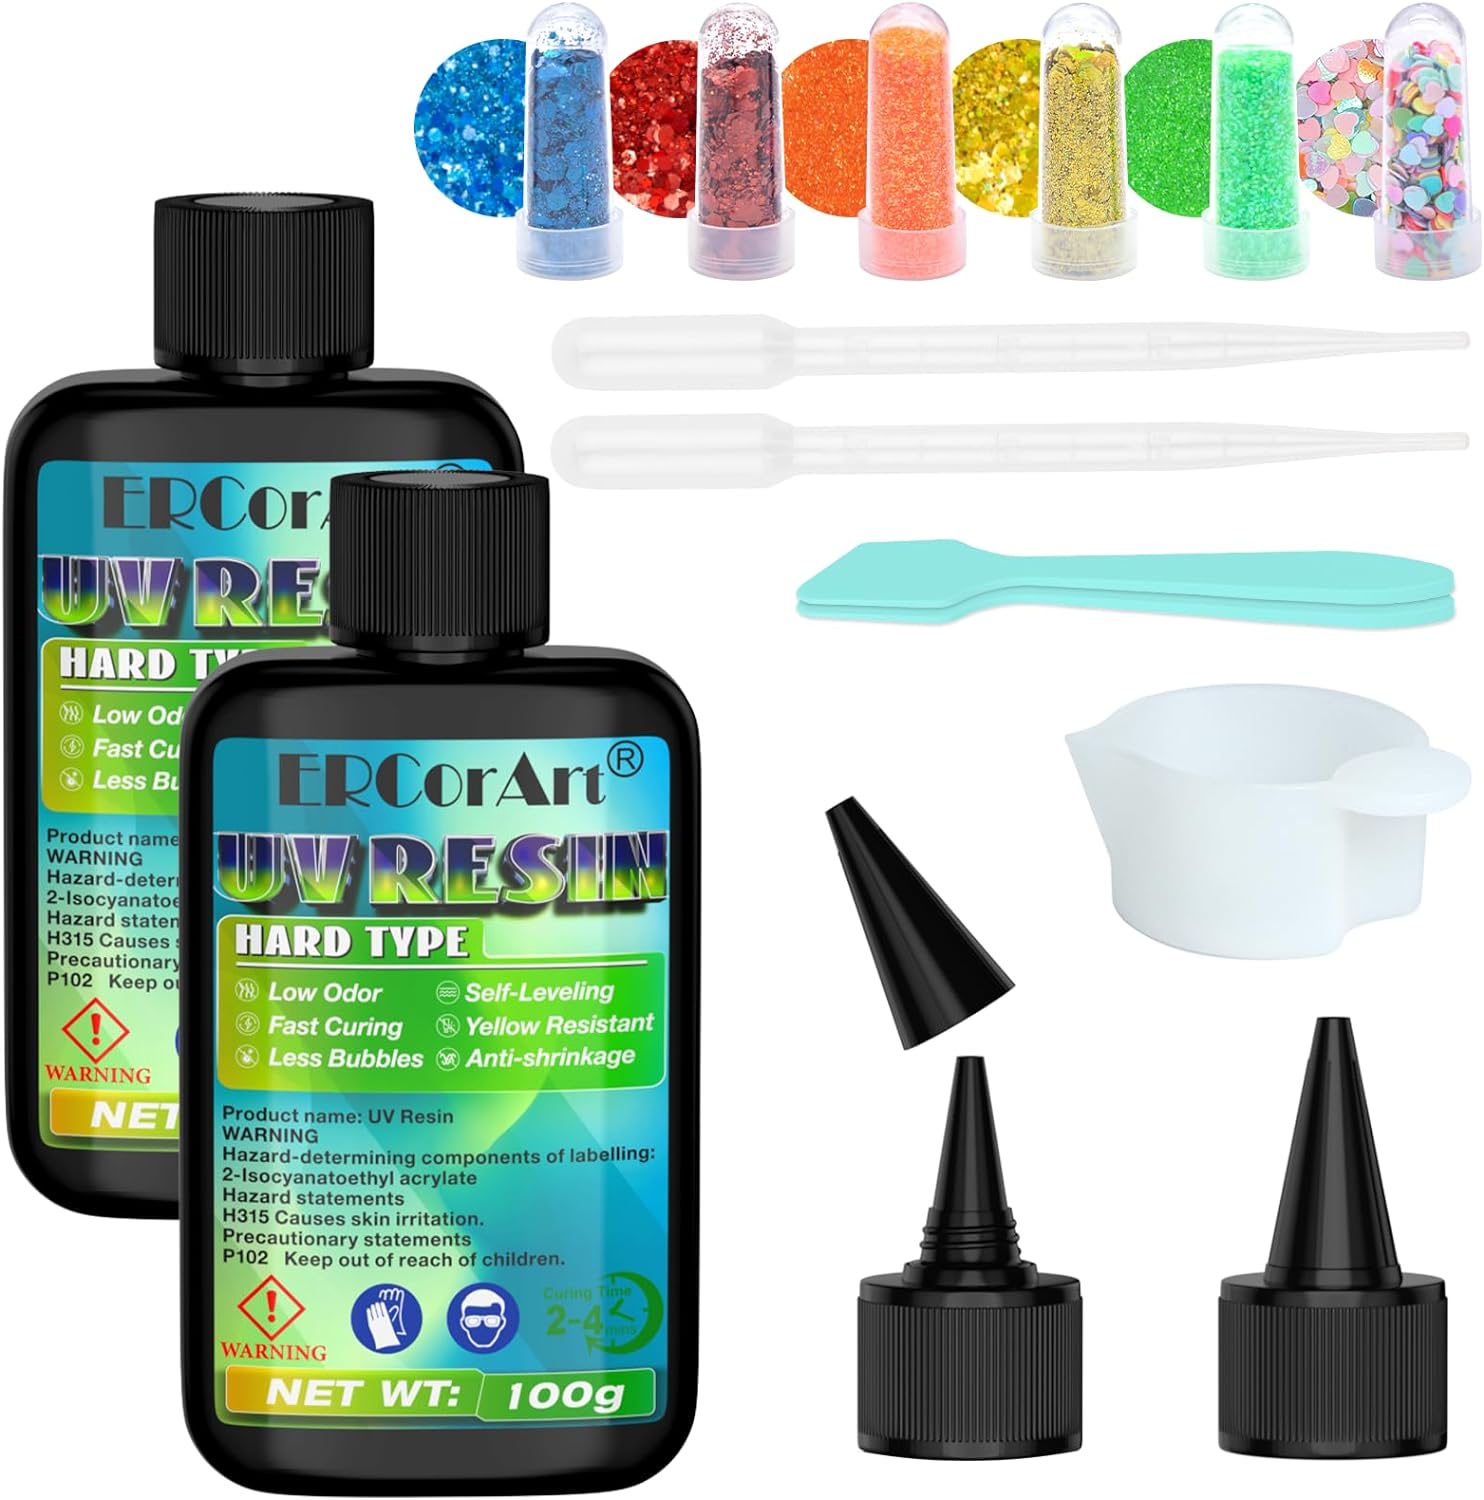 LET'S RESIN UV Resin,200g Low Viscosity Crystal Clear Ultraviolet Thin  Epoxy Resin, Quick-Curing&Low Shrinkage UV Resin Kit for Crafts, Jewelry